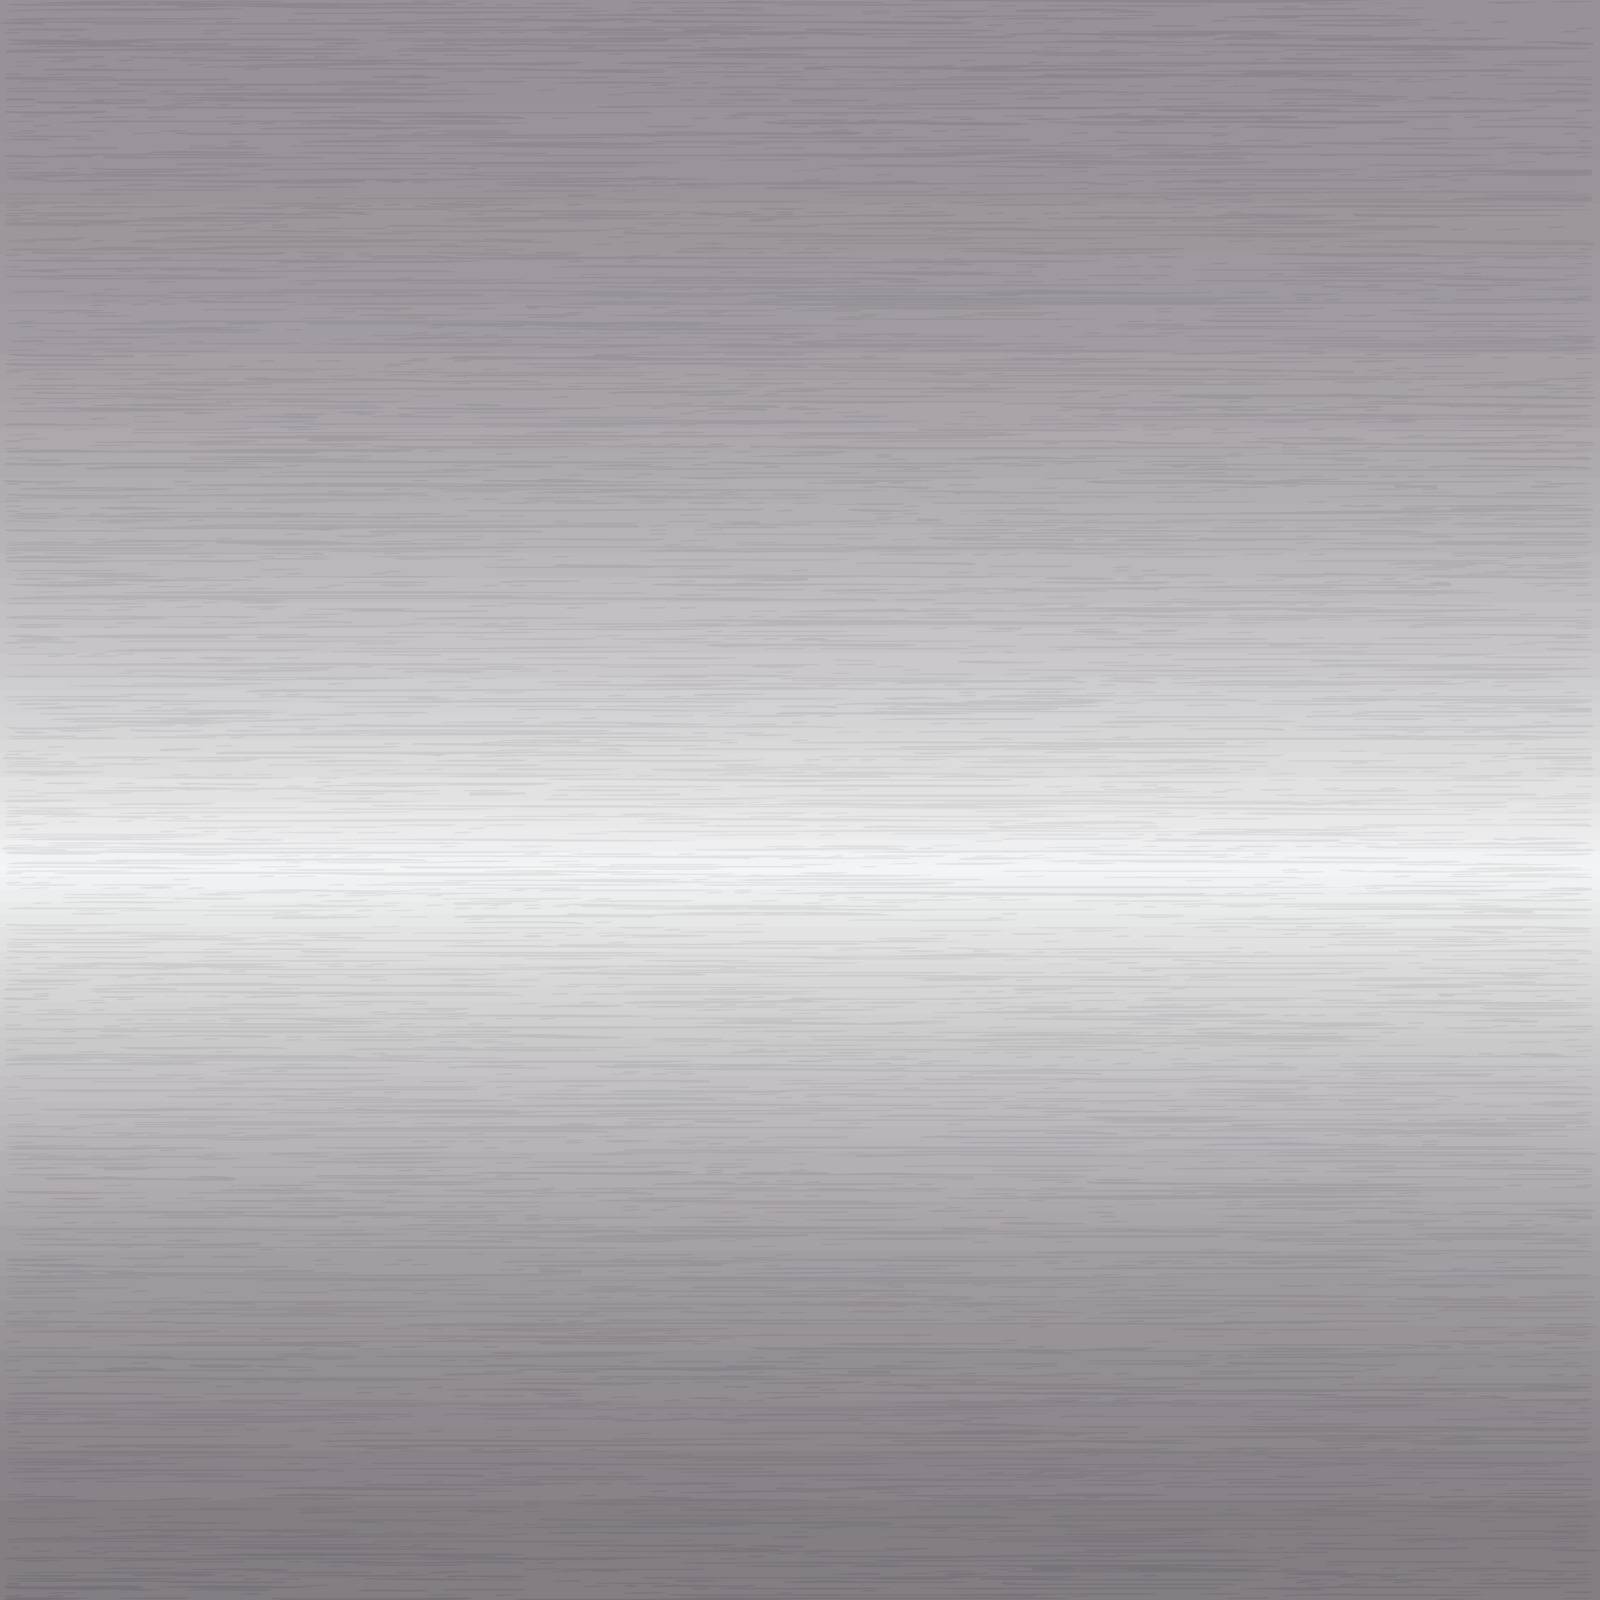 brushed silver surface by Istanbul2009